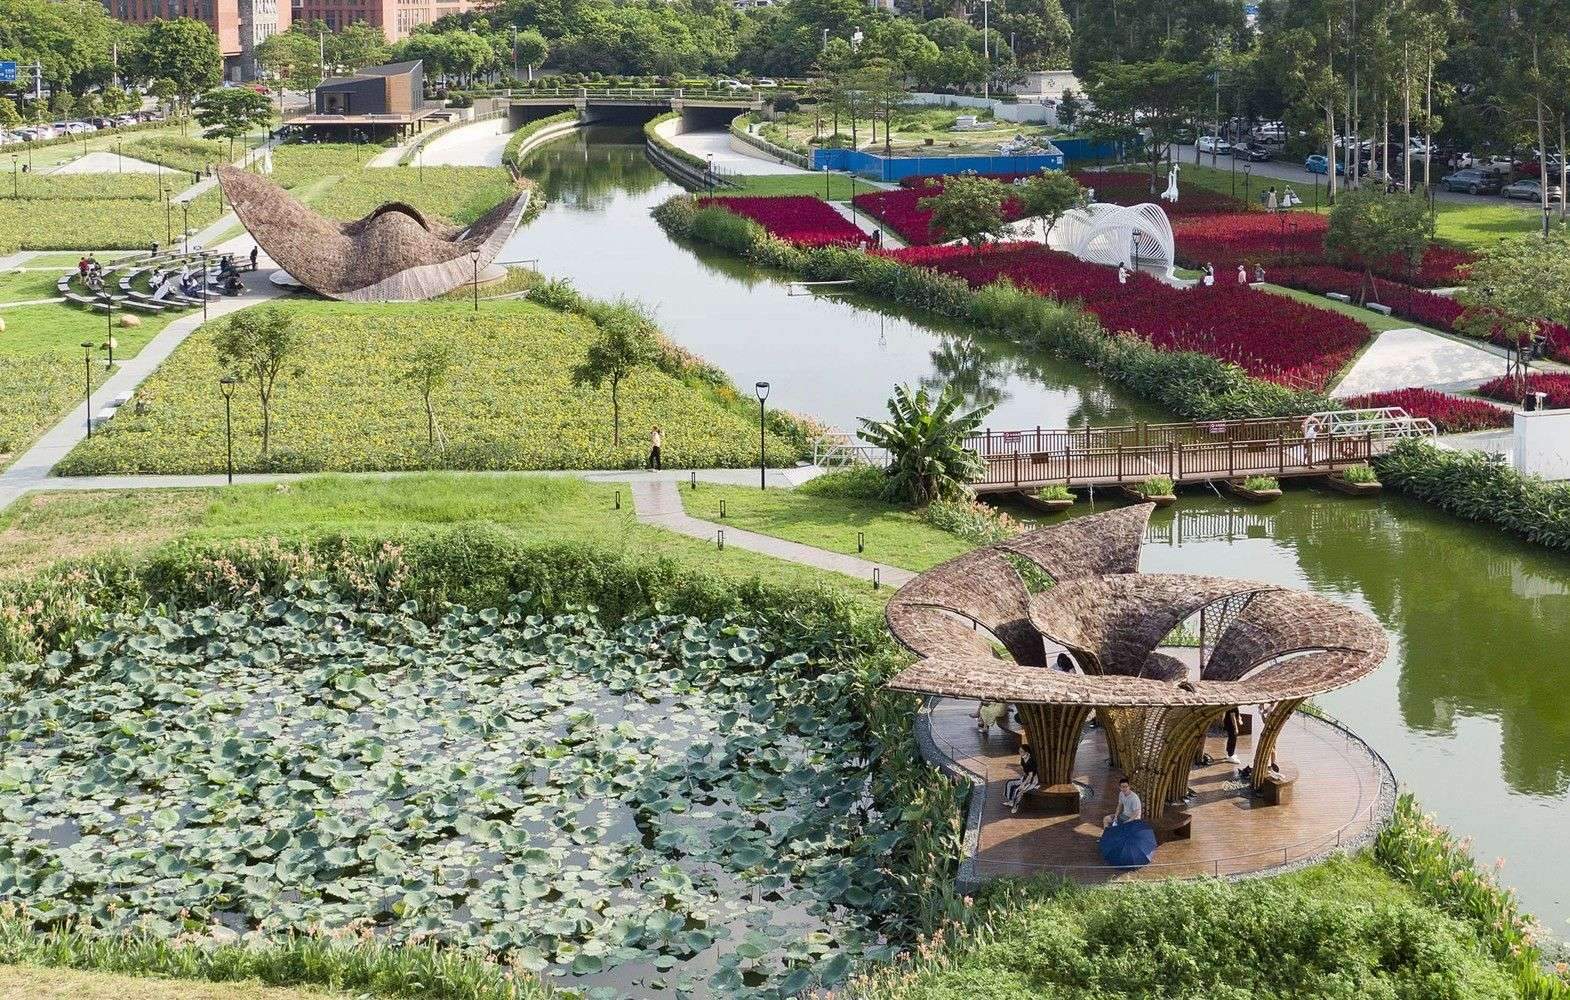 Urban Park Micro Renovation by Atelier cnS + School of Architecture, South China University of Technology